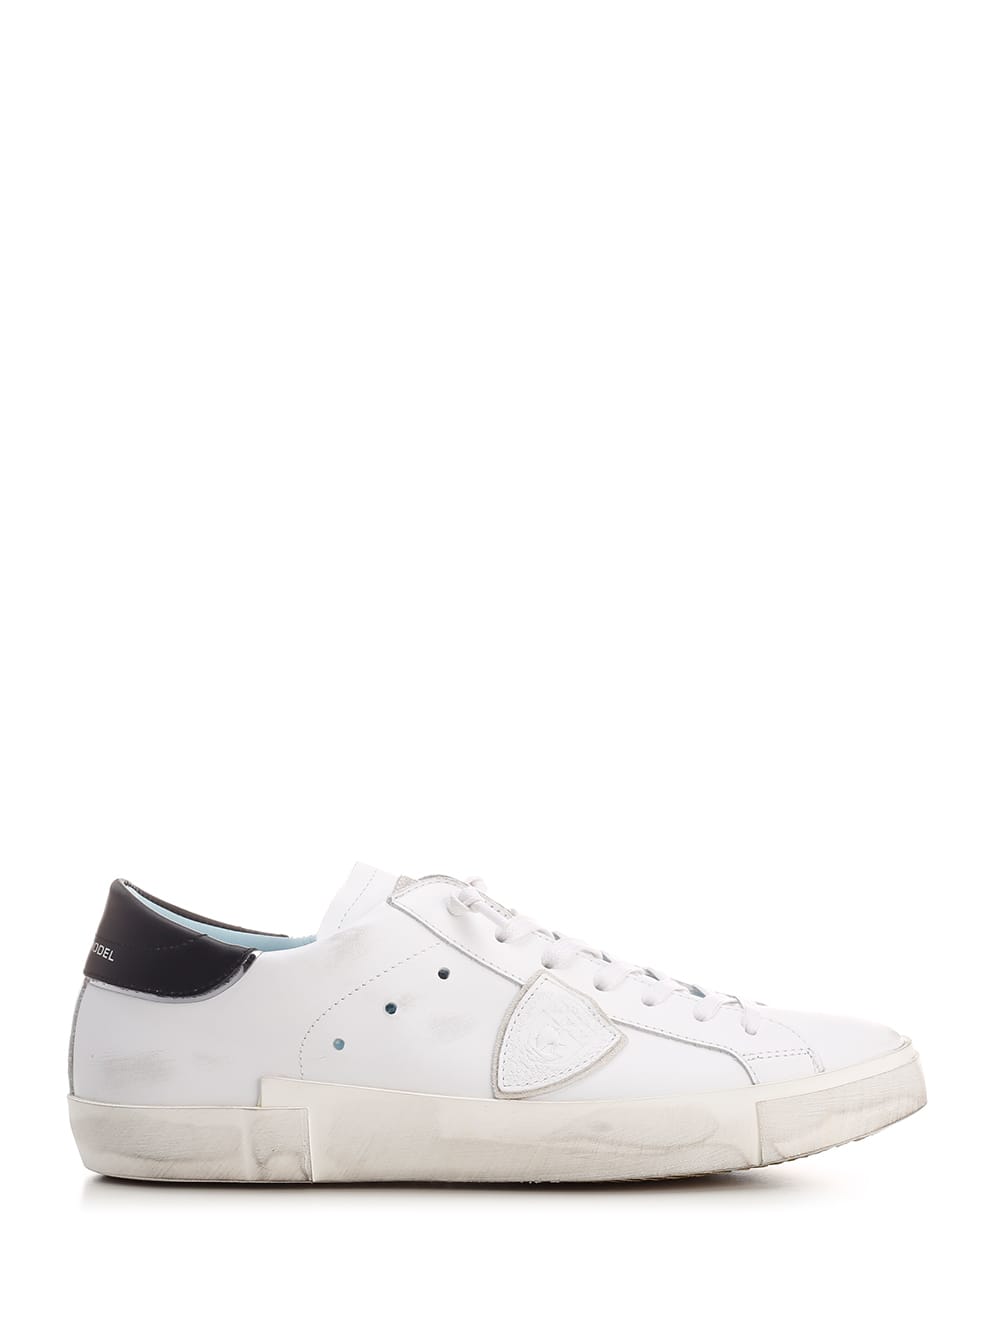 White prsx Leather Sneakers With Black Heel Tab